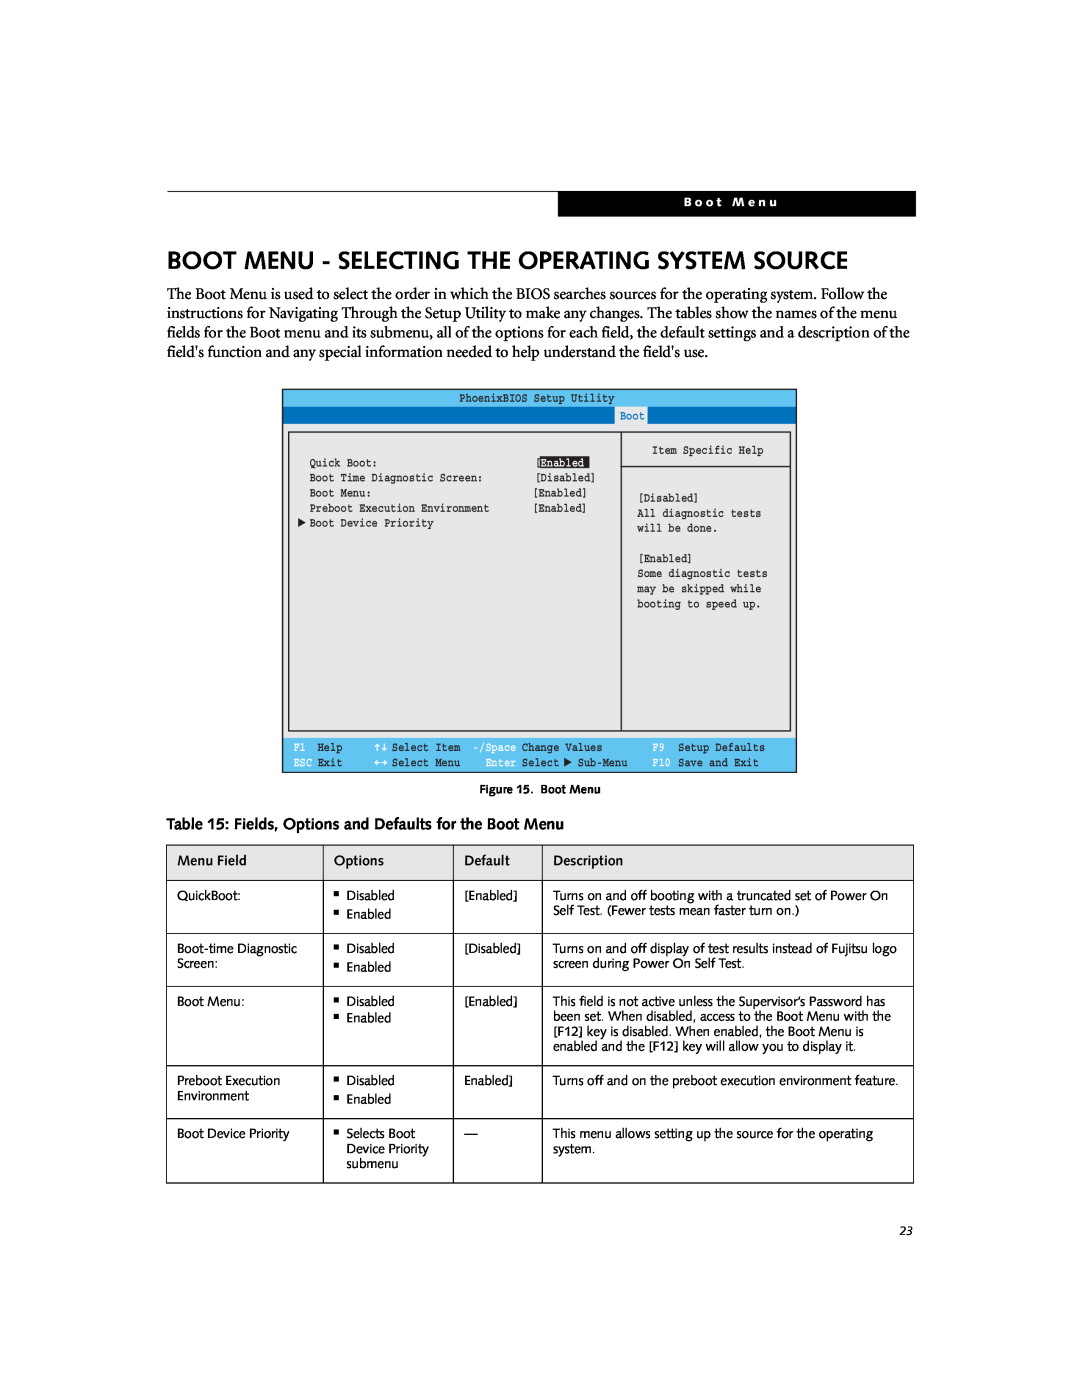 Fujitsu P1620 Boot Menu - Selecting The Operating System Source, Fields, Options and Defaults for the Boot Menu, Main 